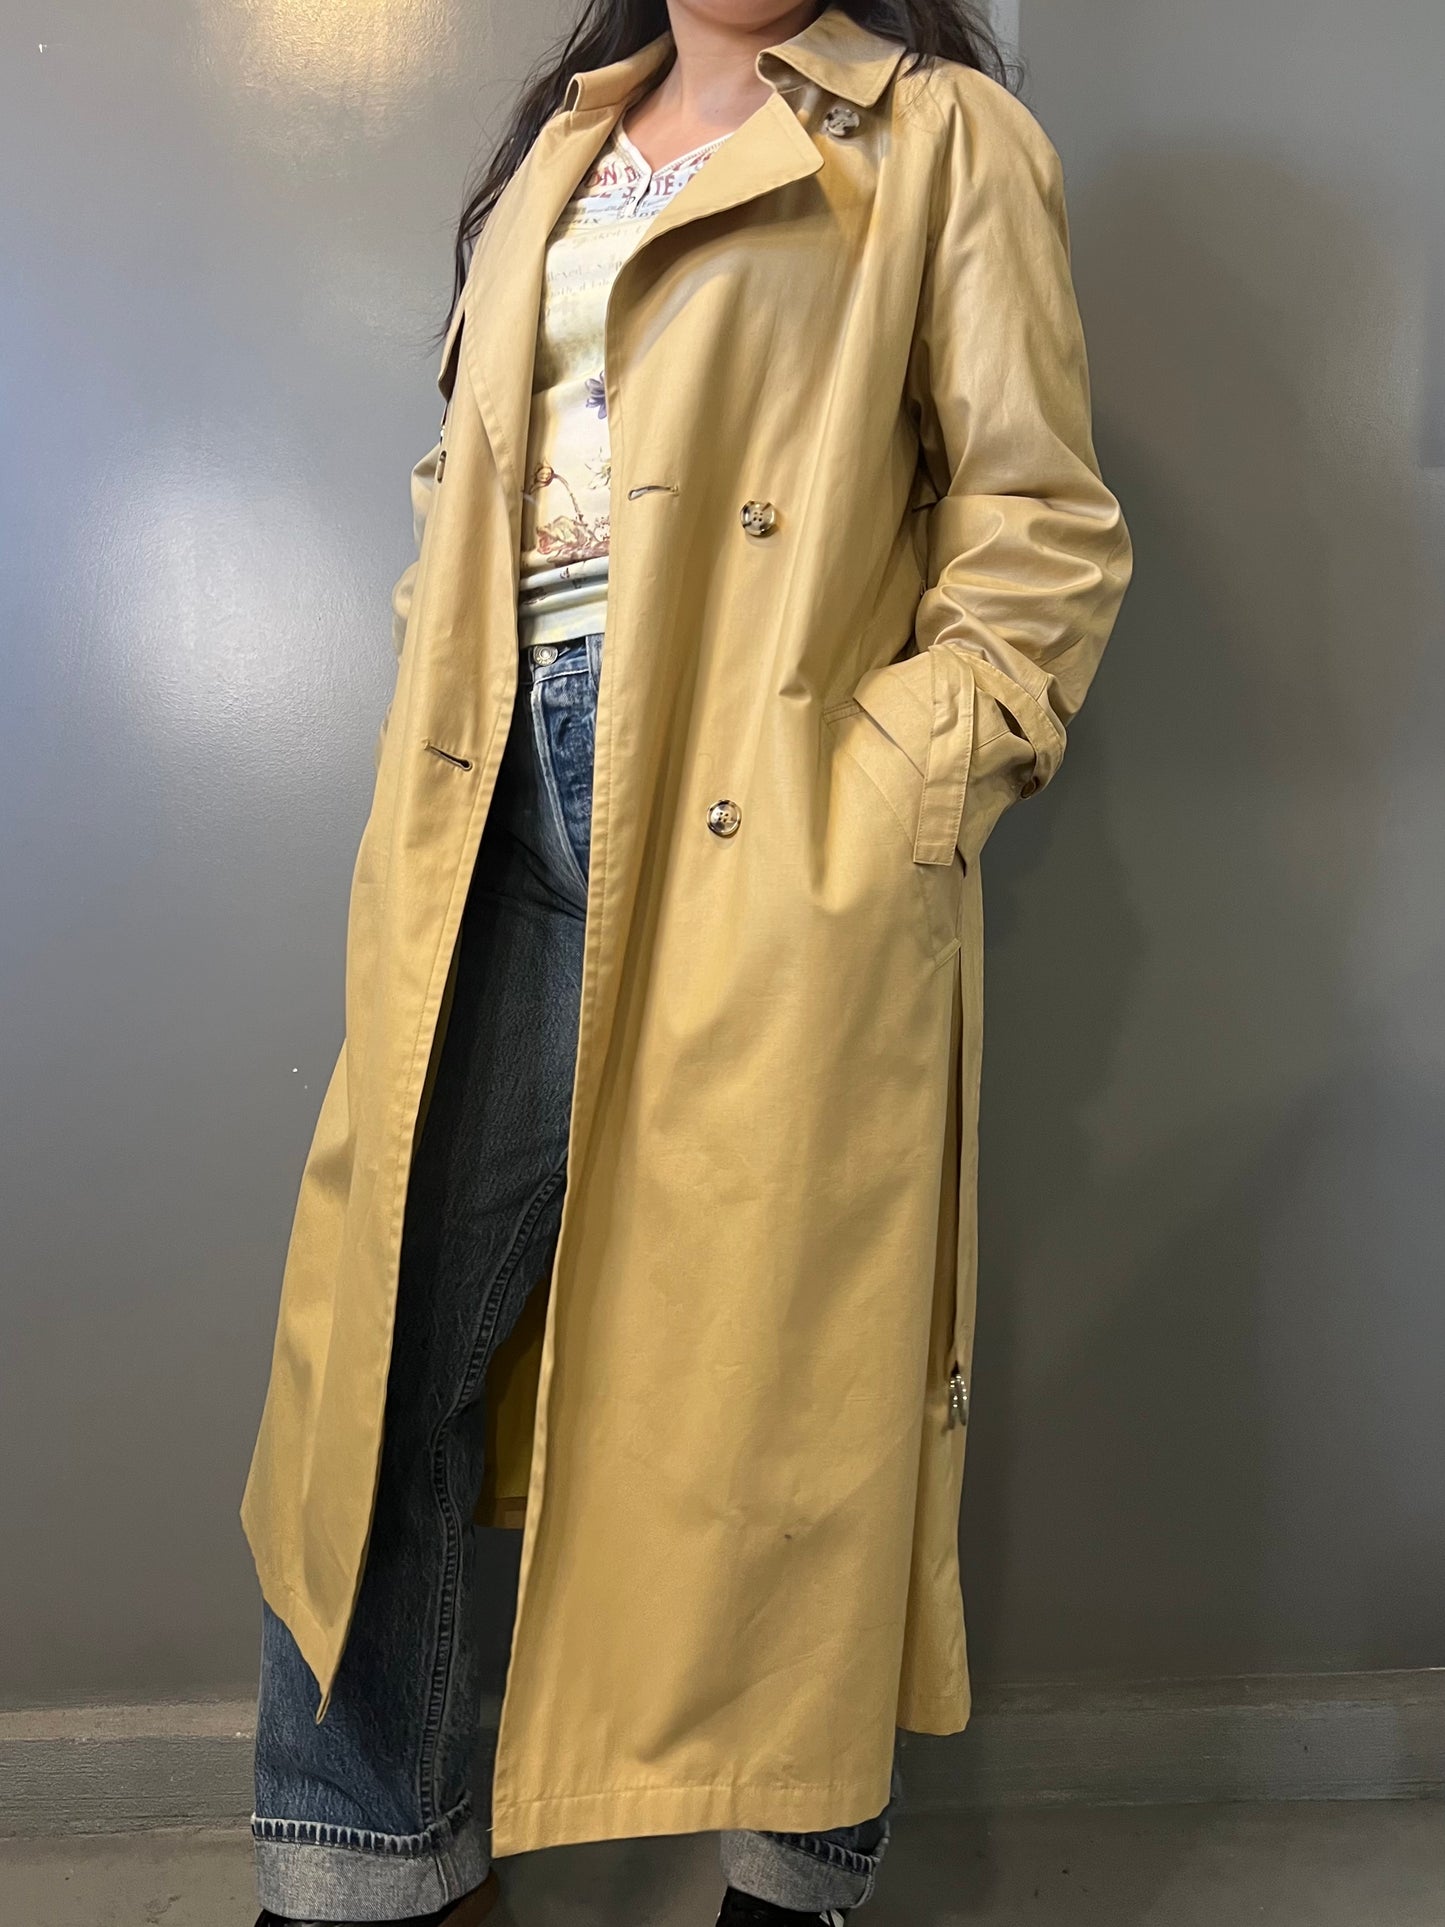 London Fog Double-Breasted Trench Coat - M/L